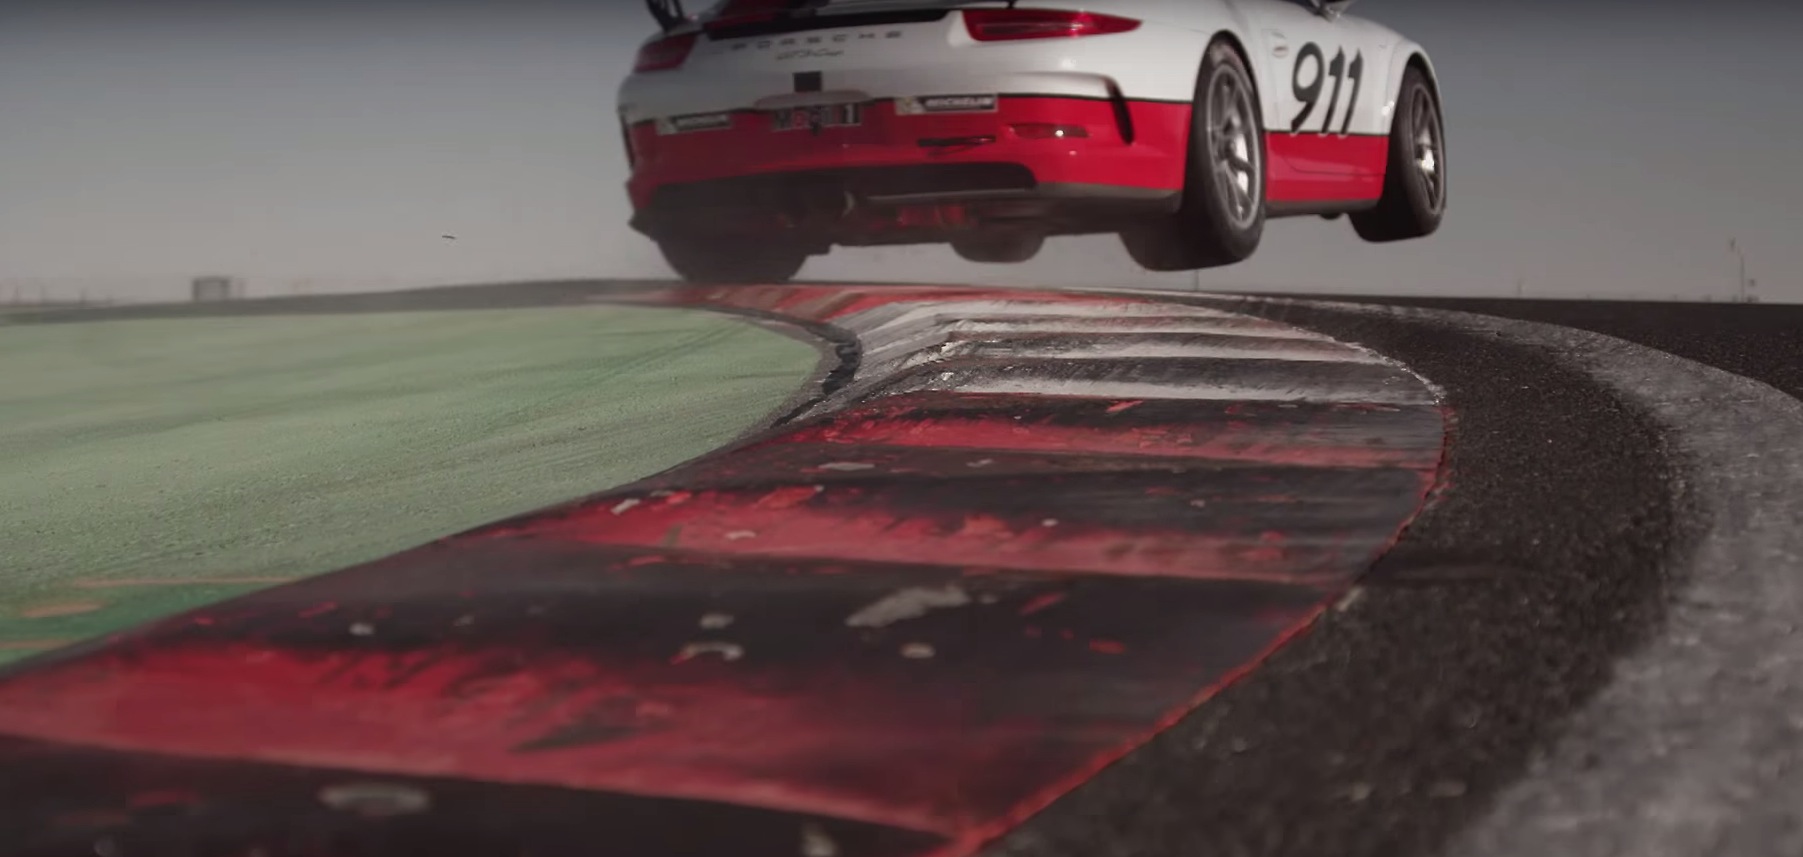 mark-webber-jumps-porsche-911-gt3-cup-spins-off-the-track-while-texting-in-cool-safety-ad-video-101969_1